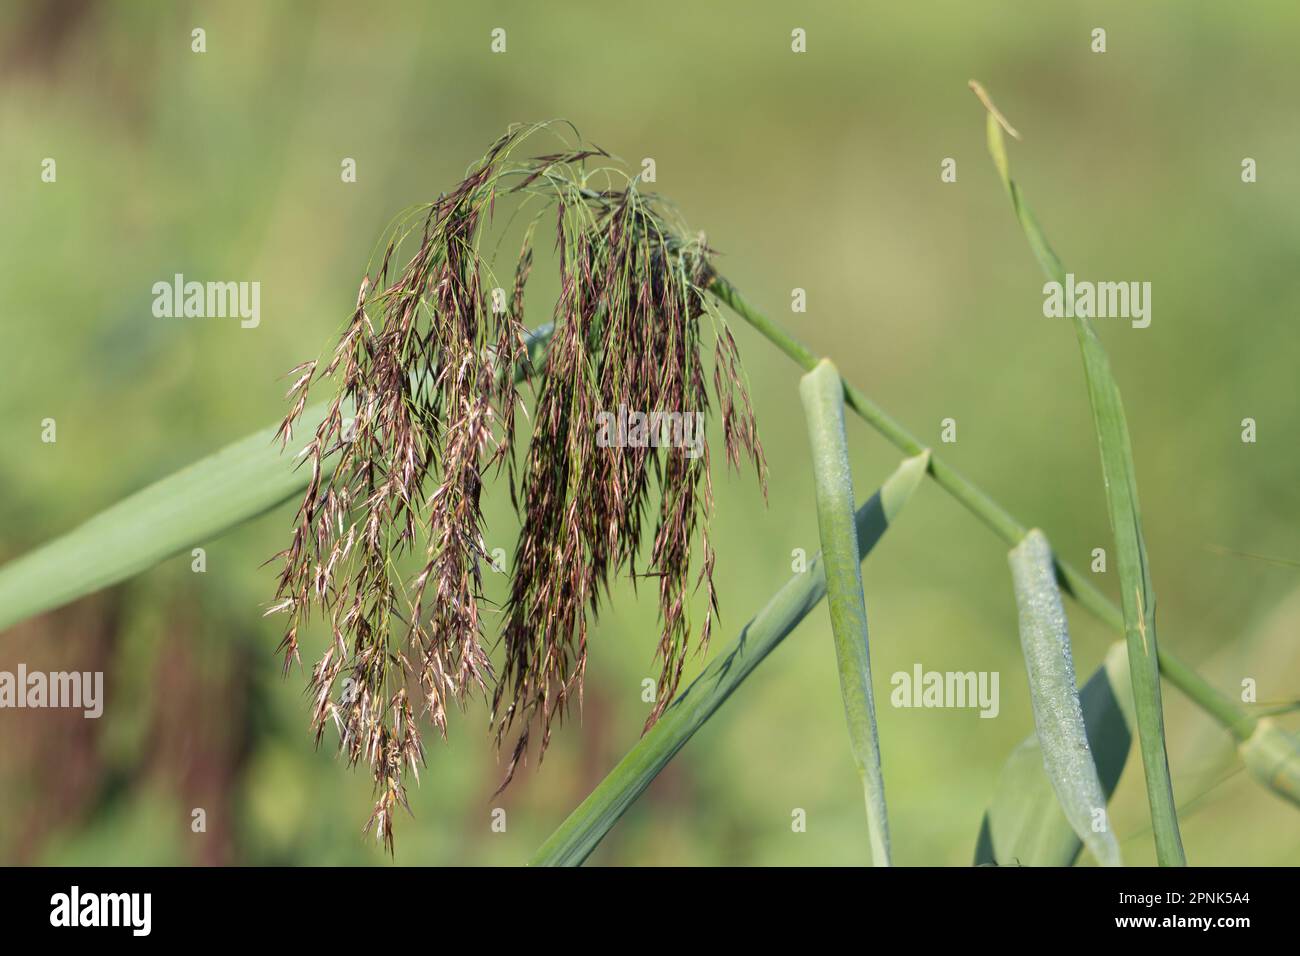 one common reed (Phragmites australis) flower head isolated on a natural green background Stock Photo